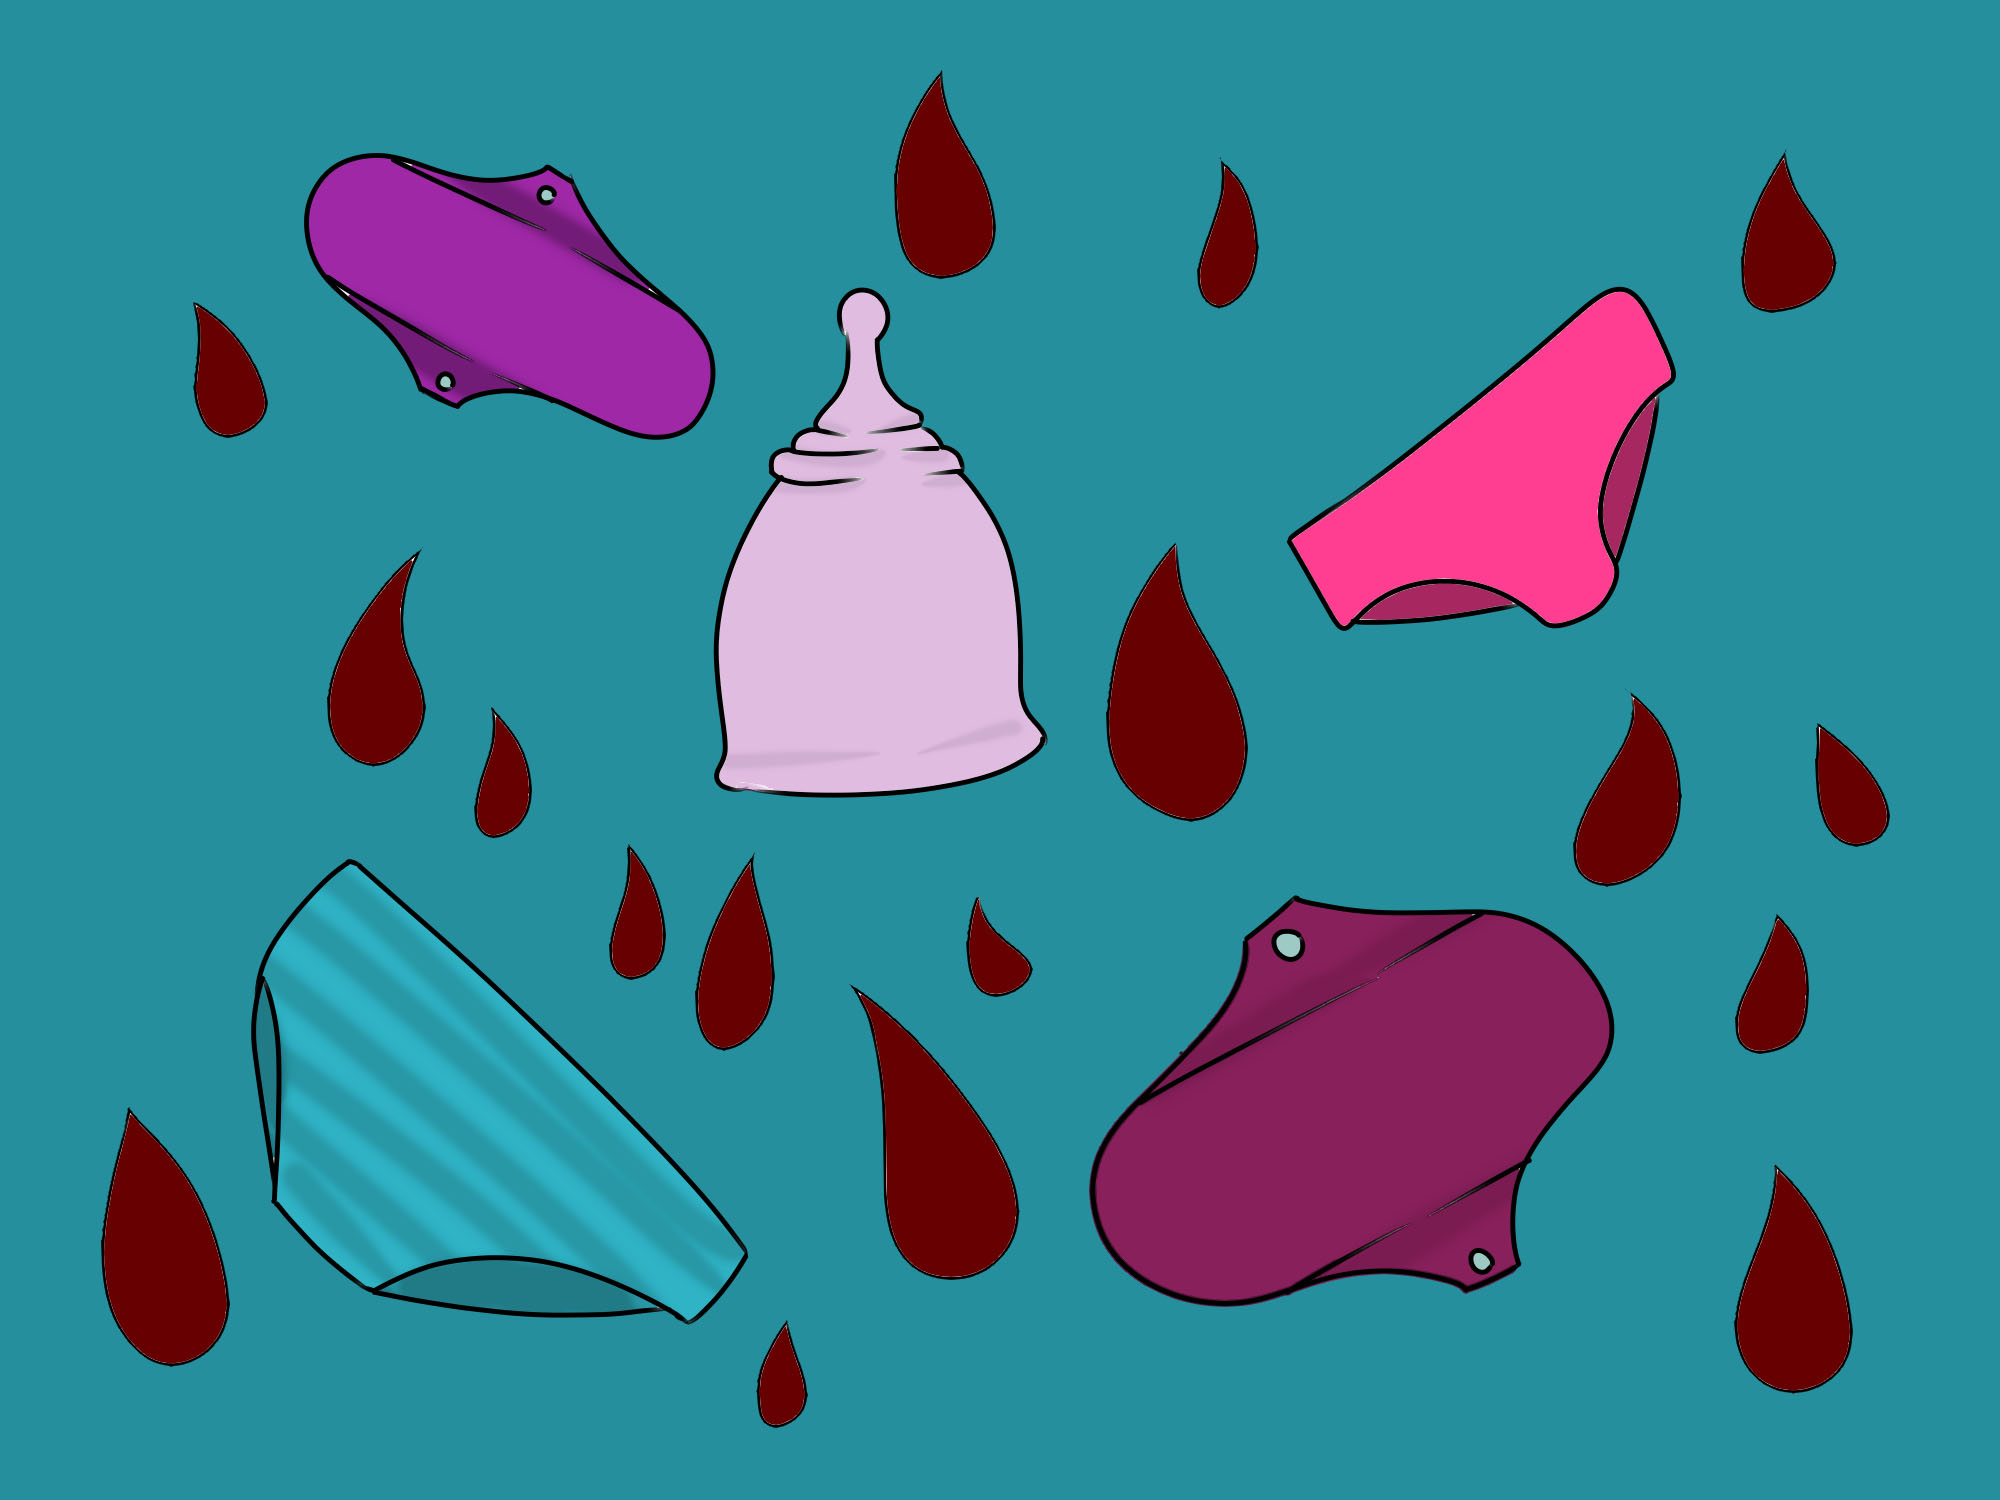 Eco-Friendly Menstrual Products